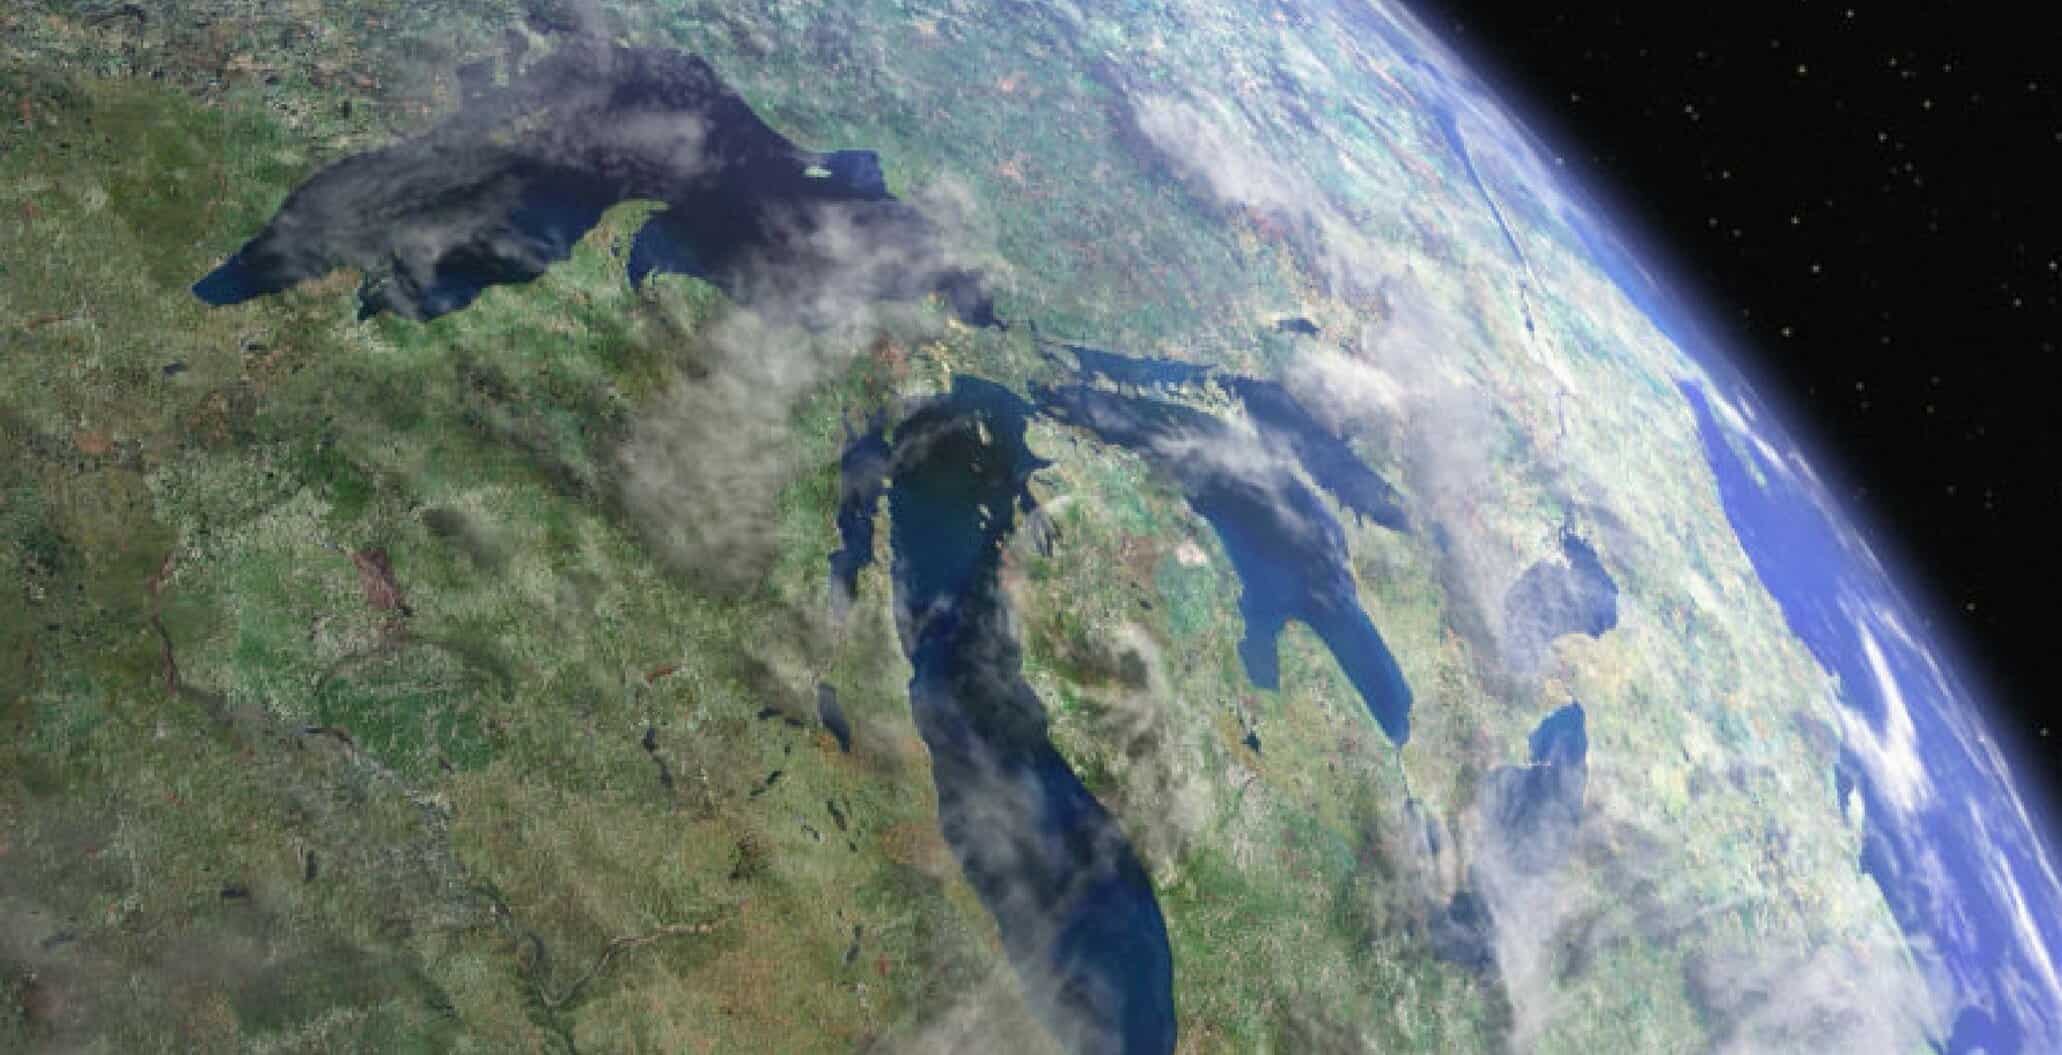 Michigan LCV calls on legislators, governor to protect and clean up state’s drinking water